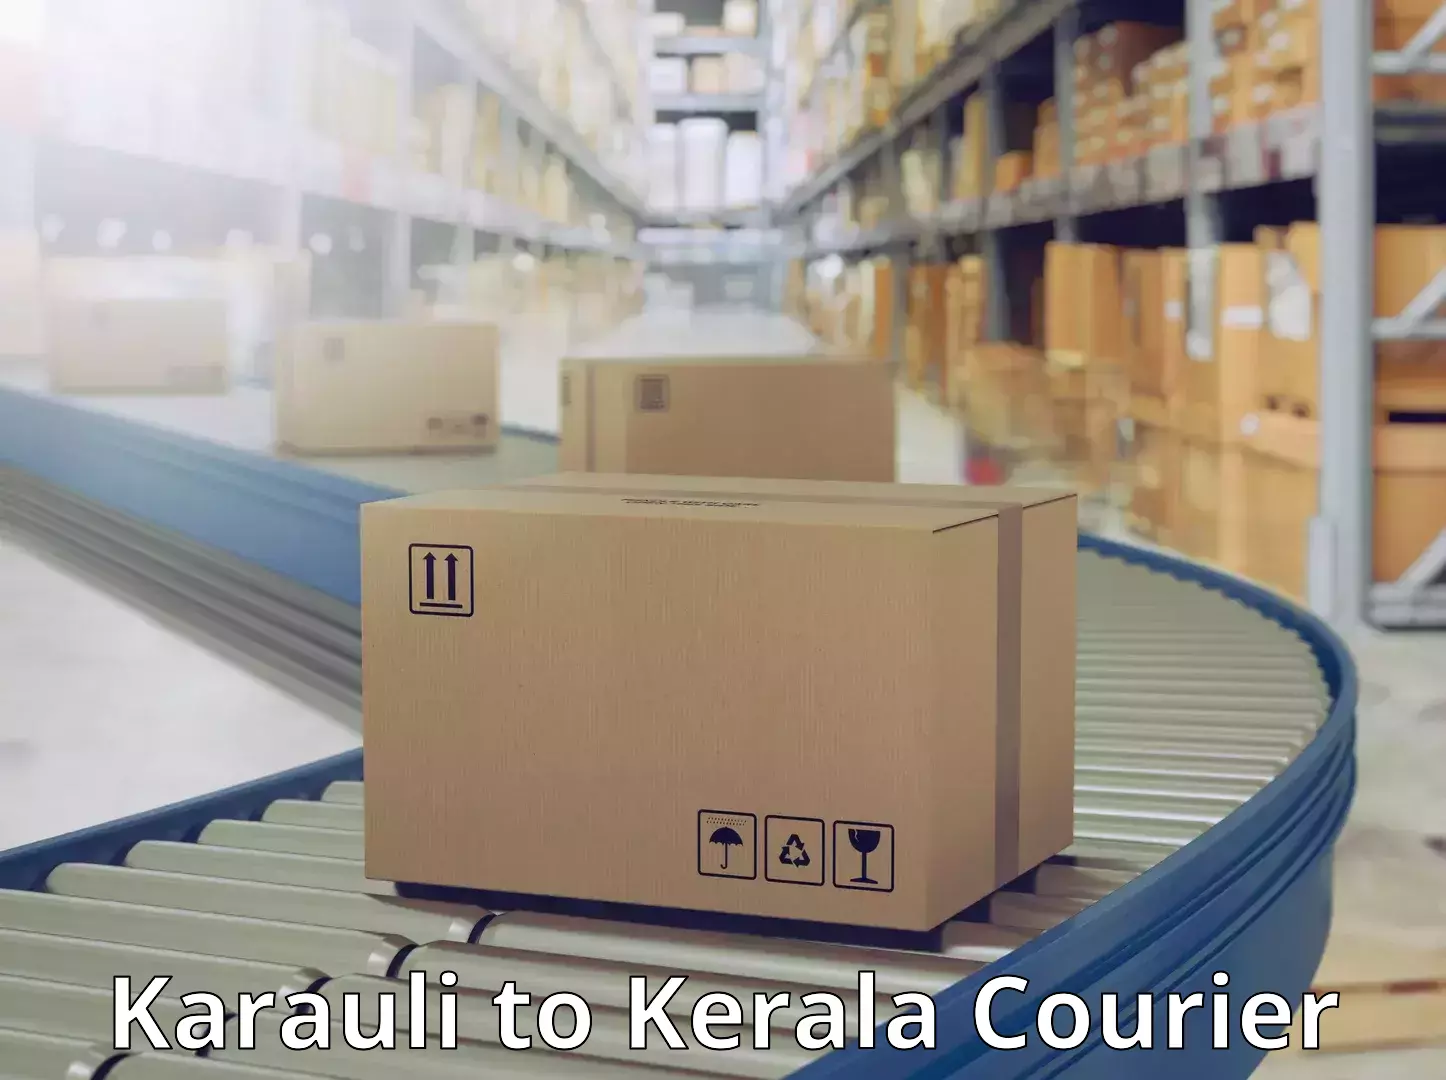 Express delivery capabilities Karauli to Cochin